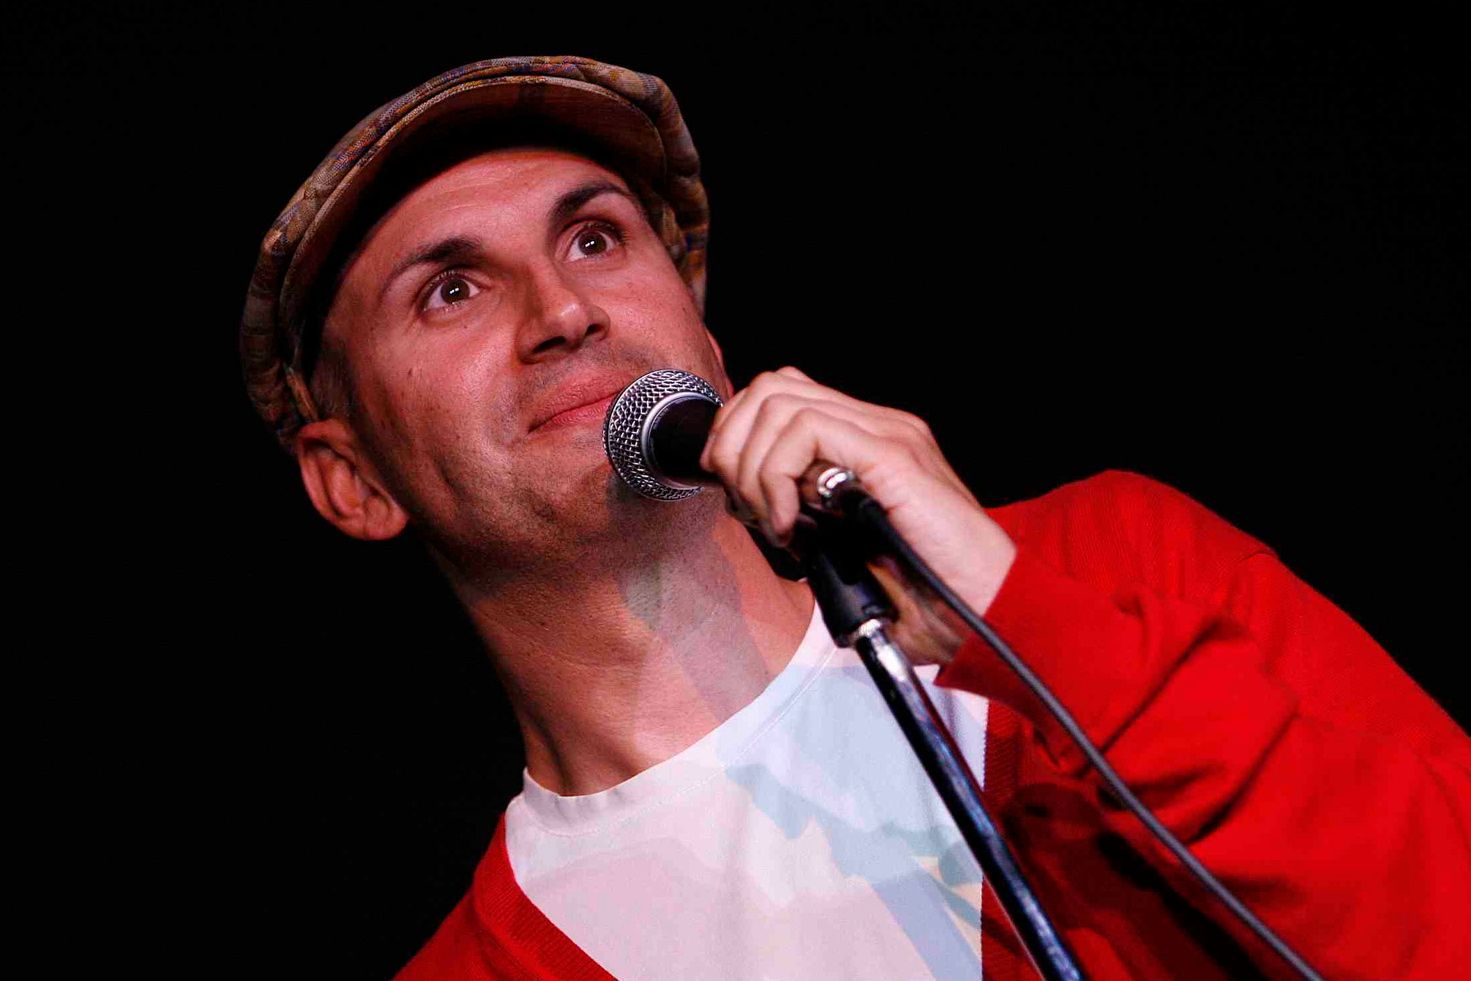 Comedian and gay activist to playfully explore gender, religion and climate change